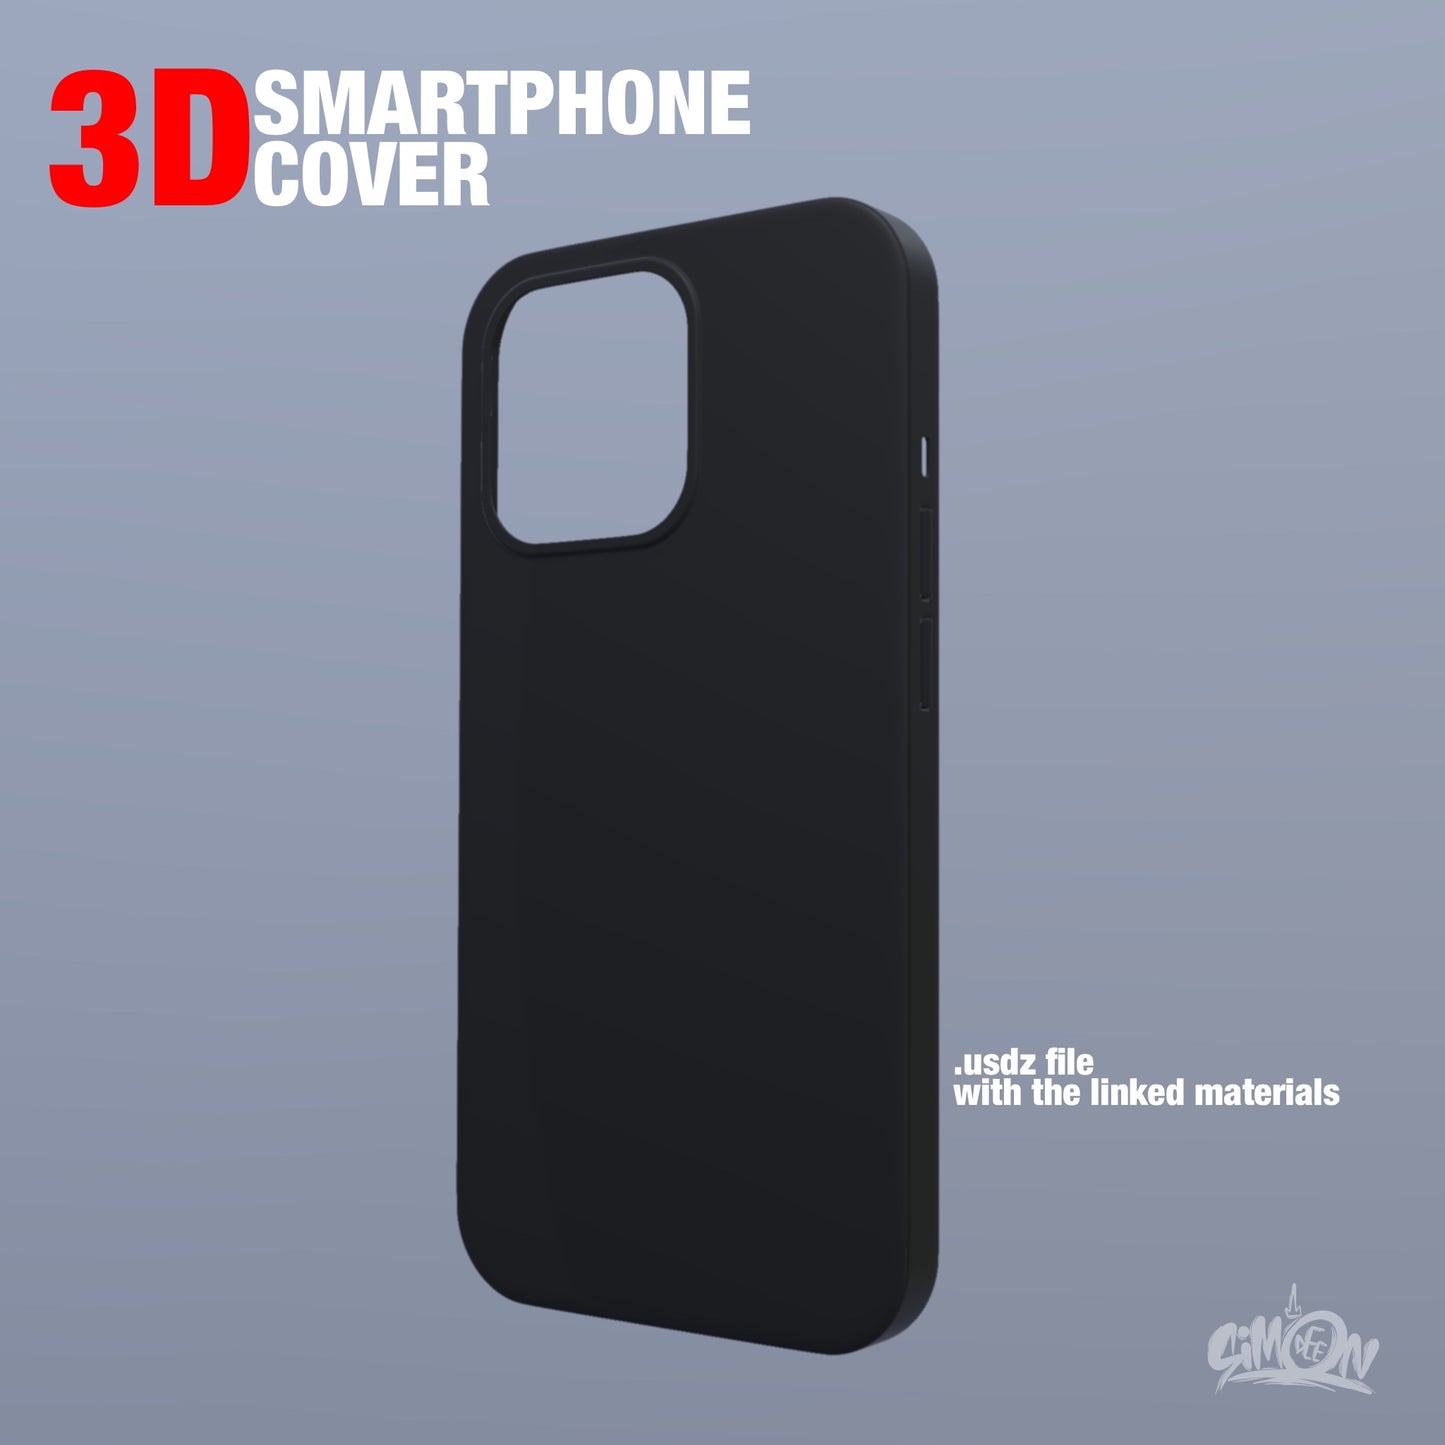 3D Smartphone Cover